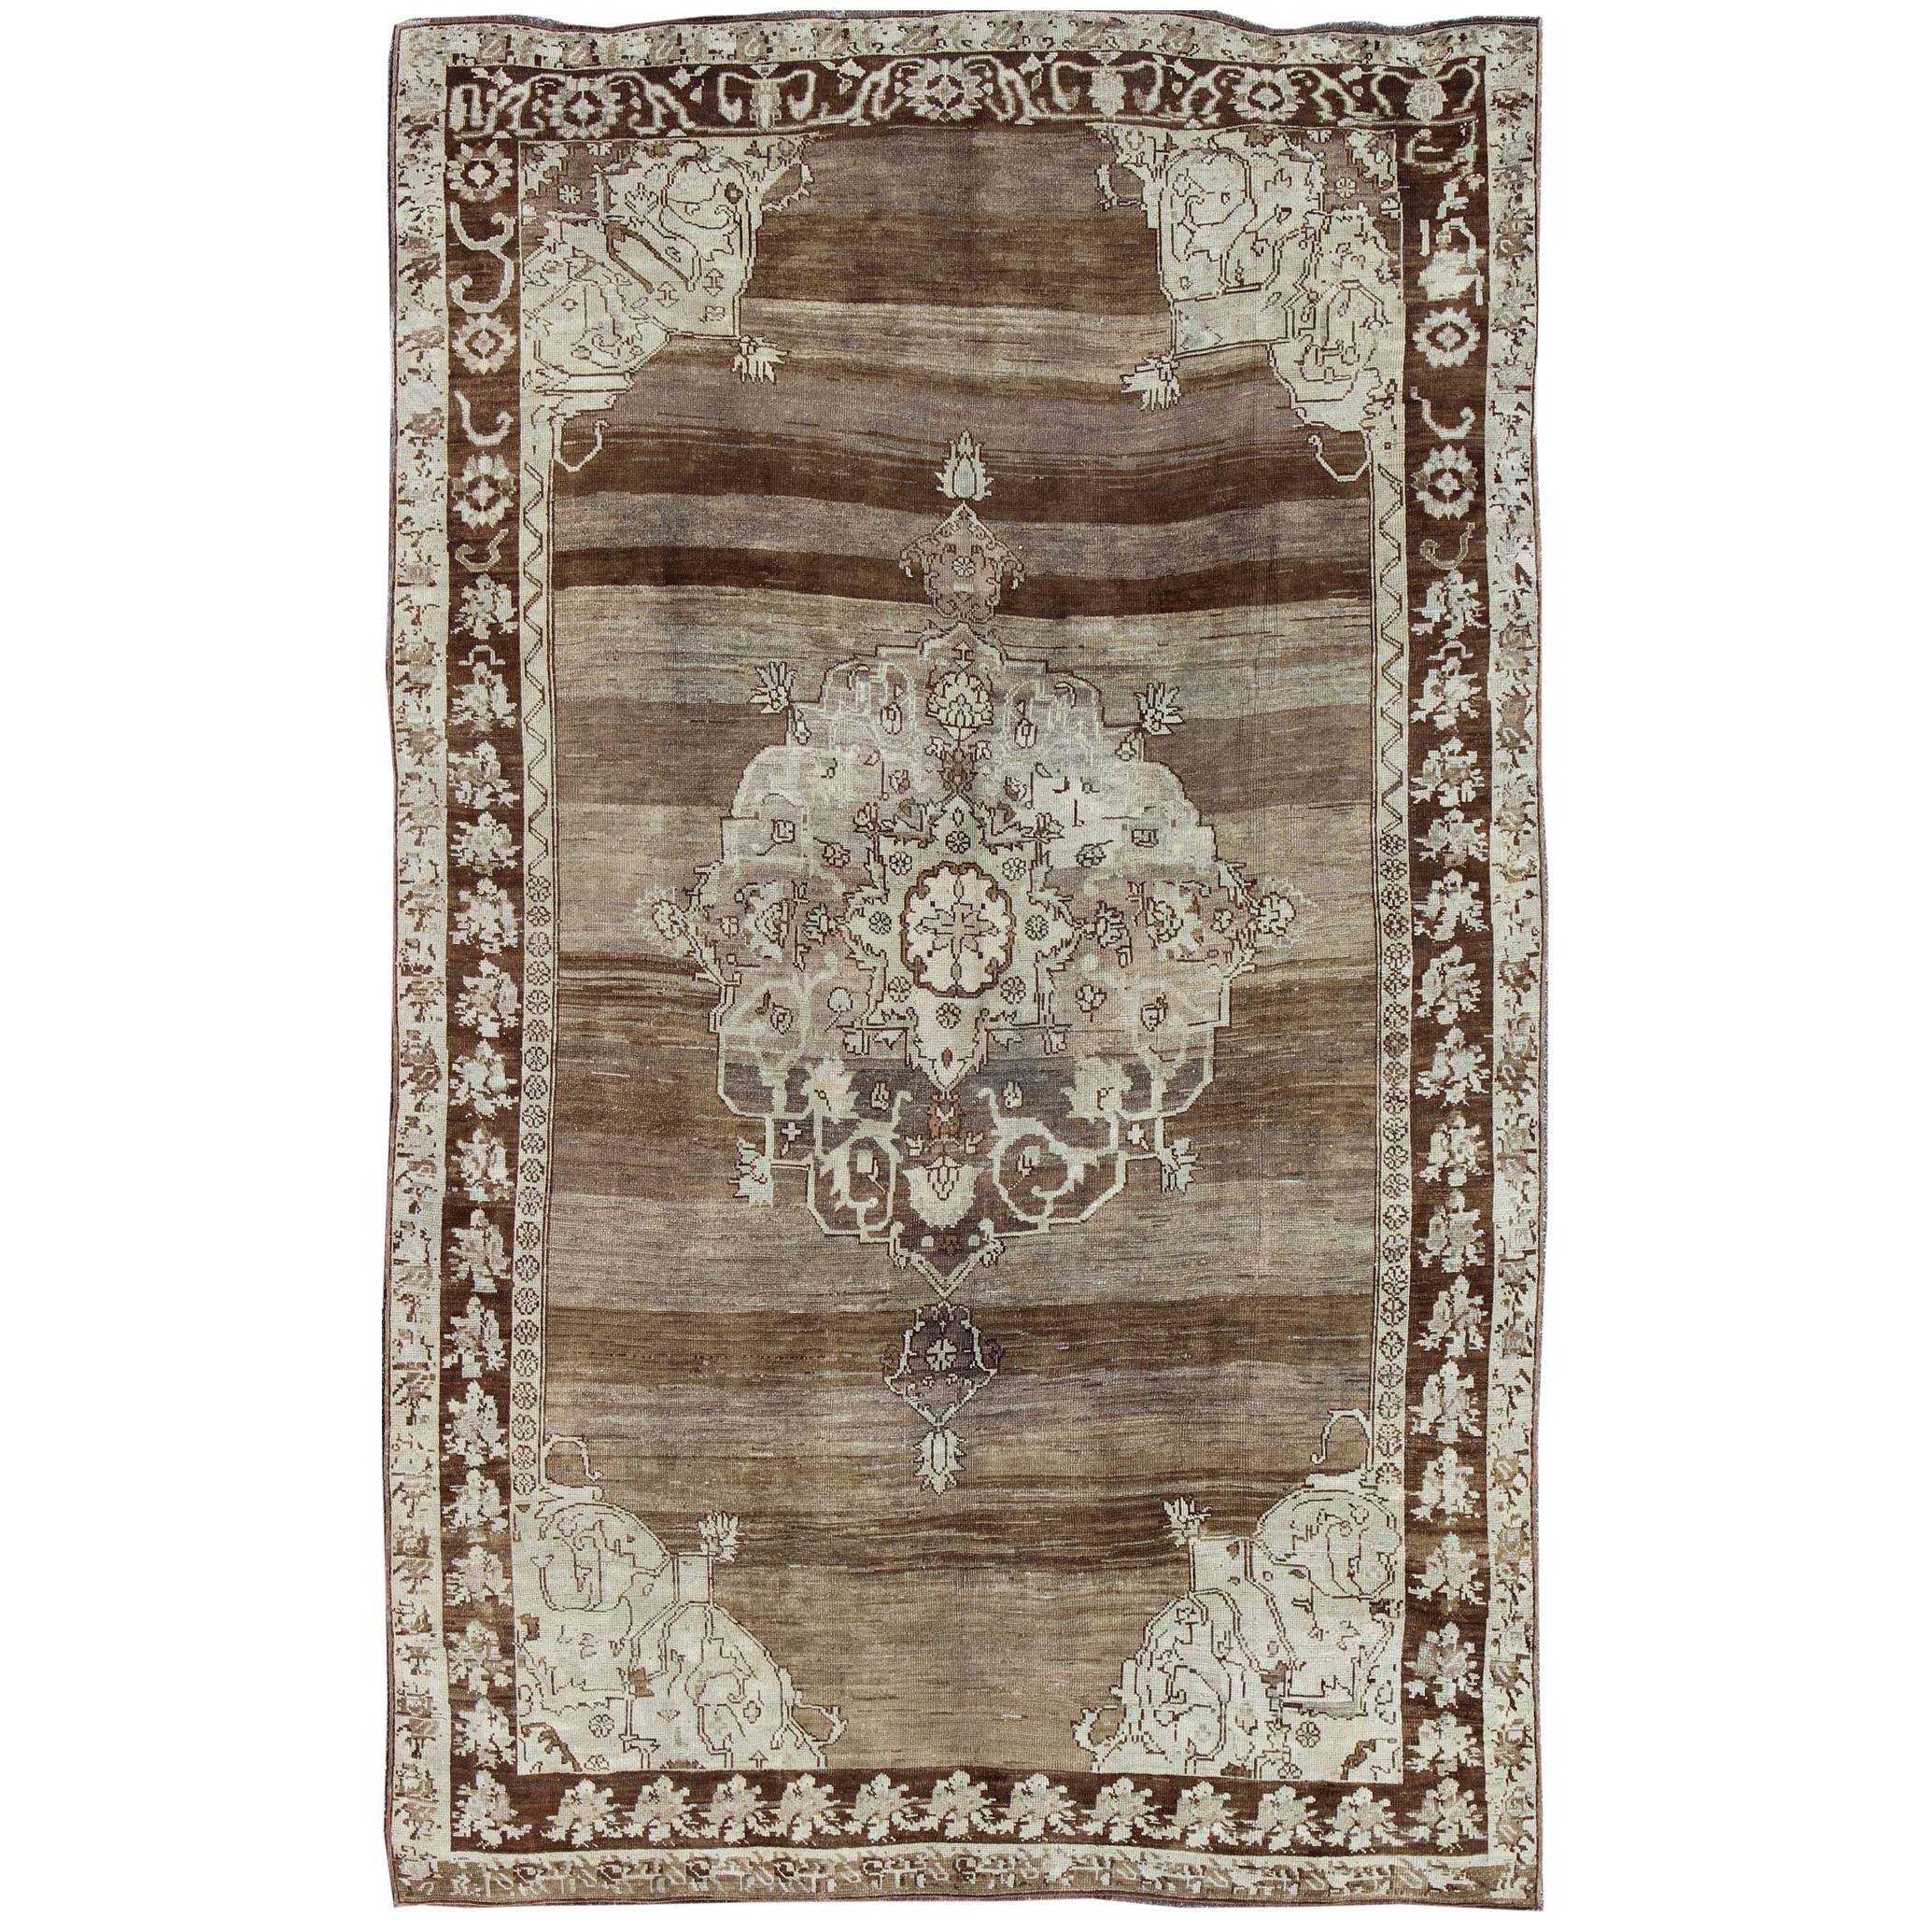 Unique Turkish Kars Carpet in Brown, Gray, Green and Ivory